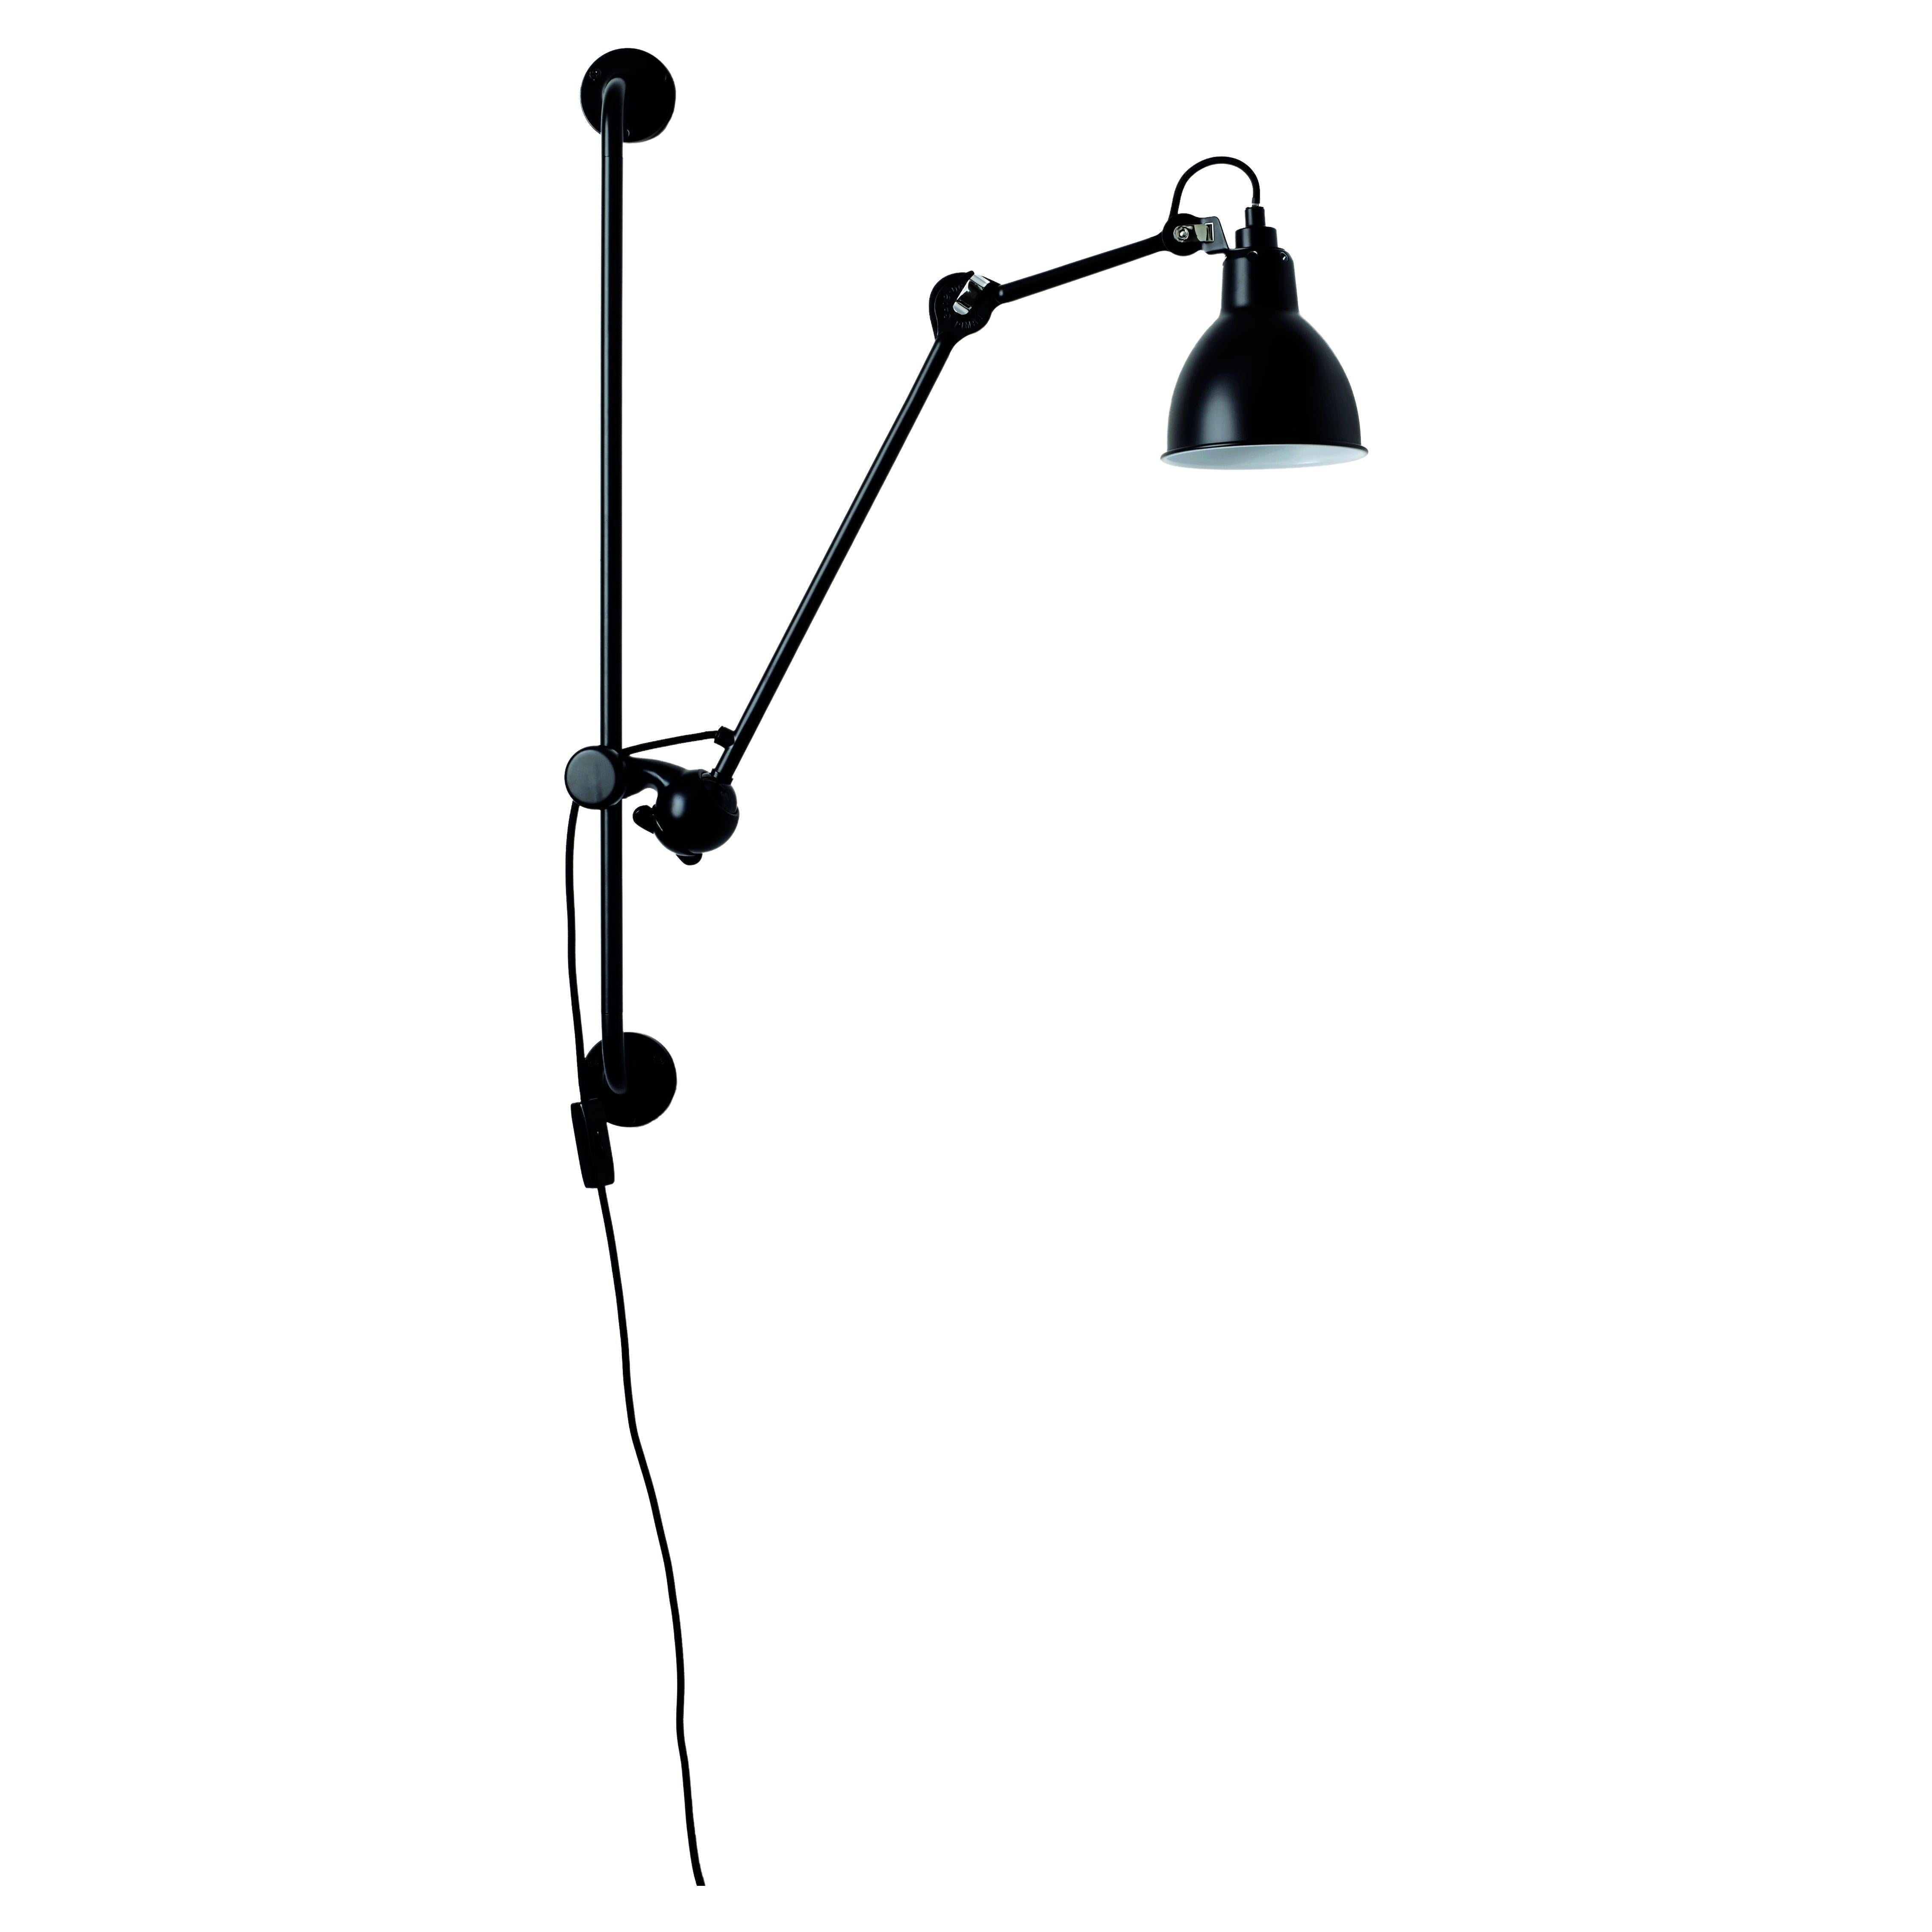 DCW Editions La Lampe Gras N°210 Wall Lamp in Black Arm and Black Shade For Sale